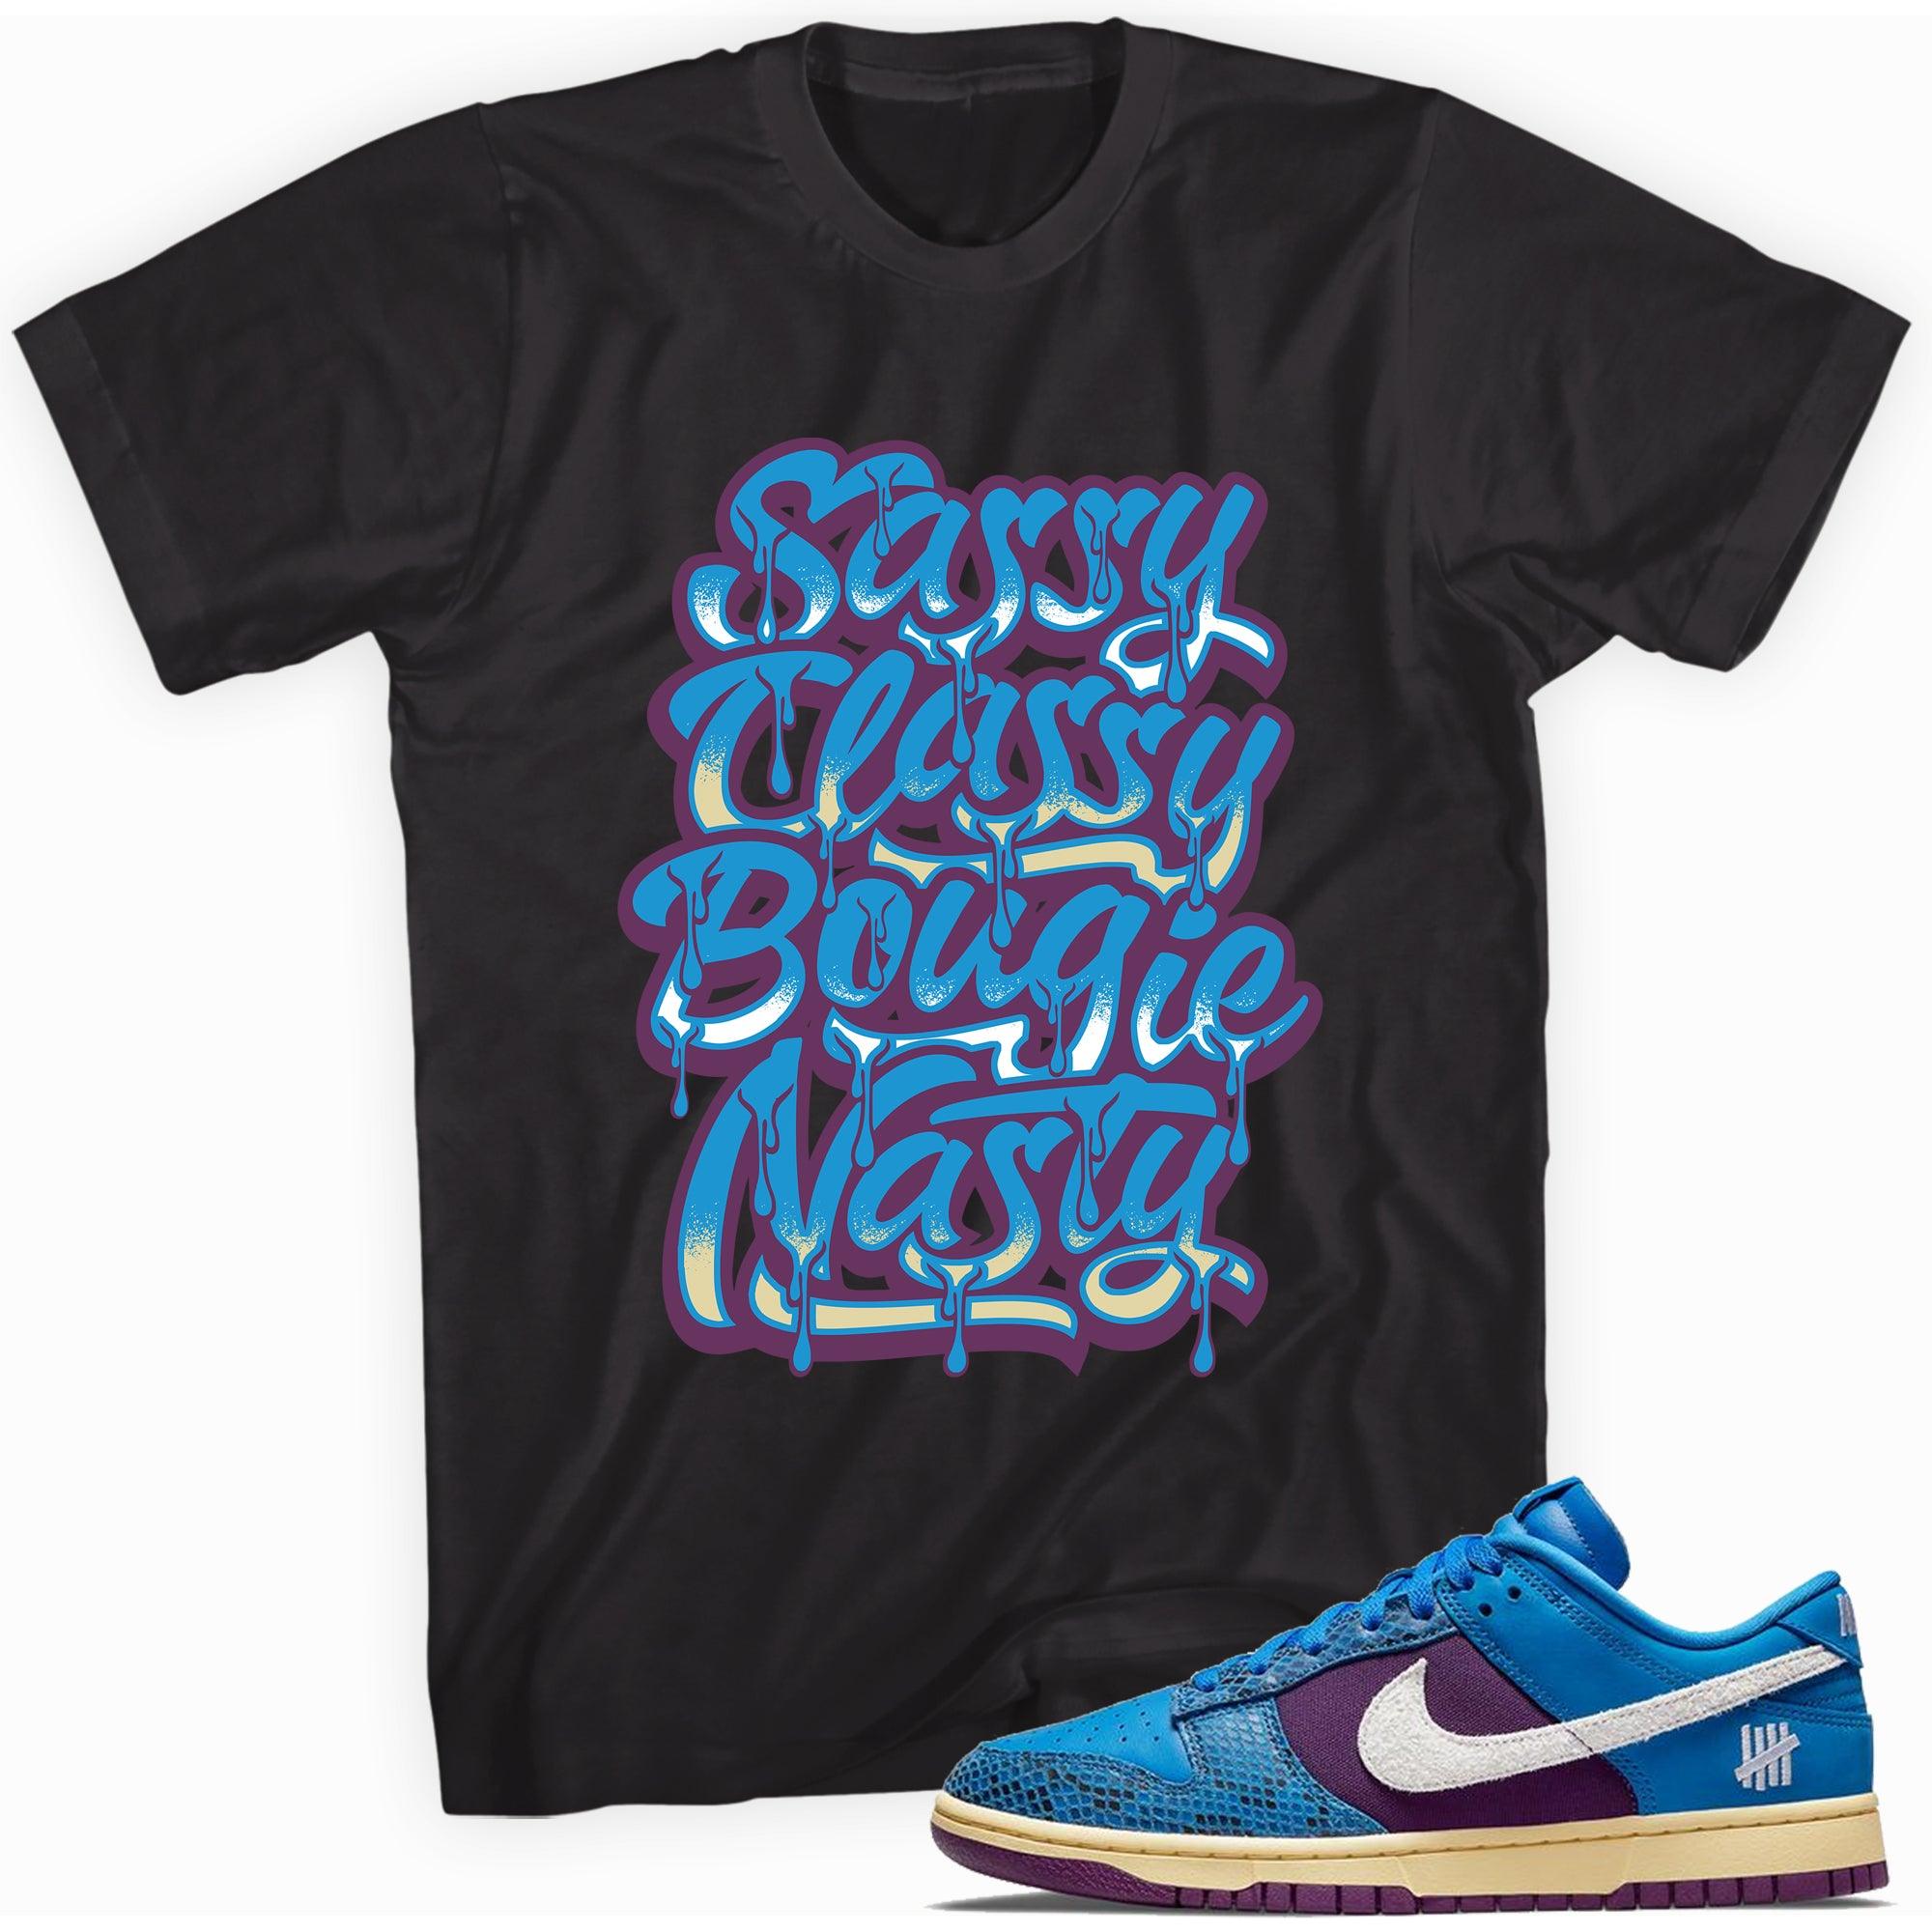 Sassy Classy Shirt Nike Dunk Low Undefeated 5 On It Dunk vs AF1 Sneakers photo